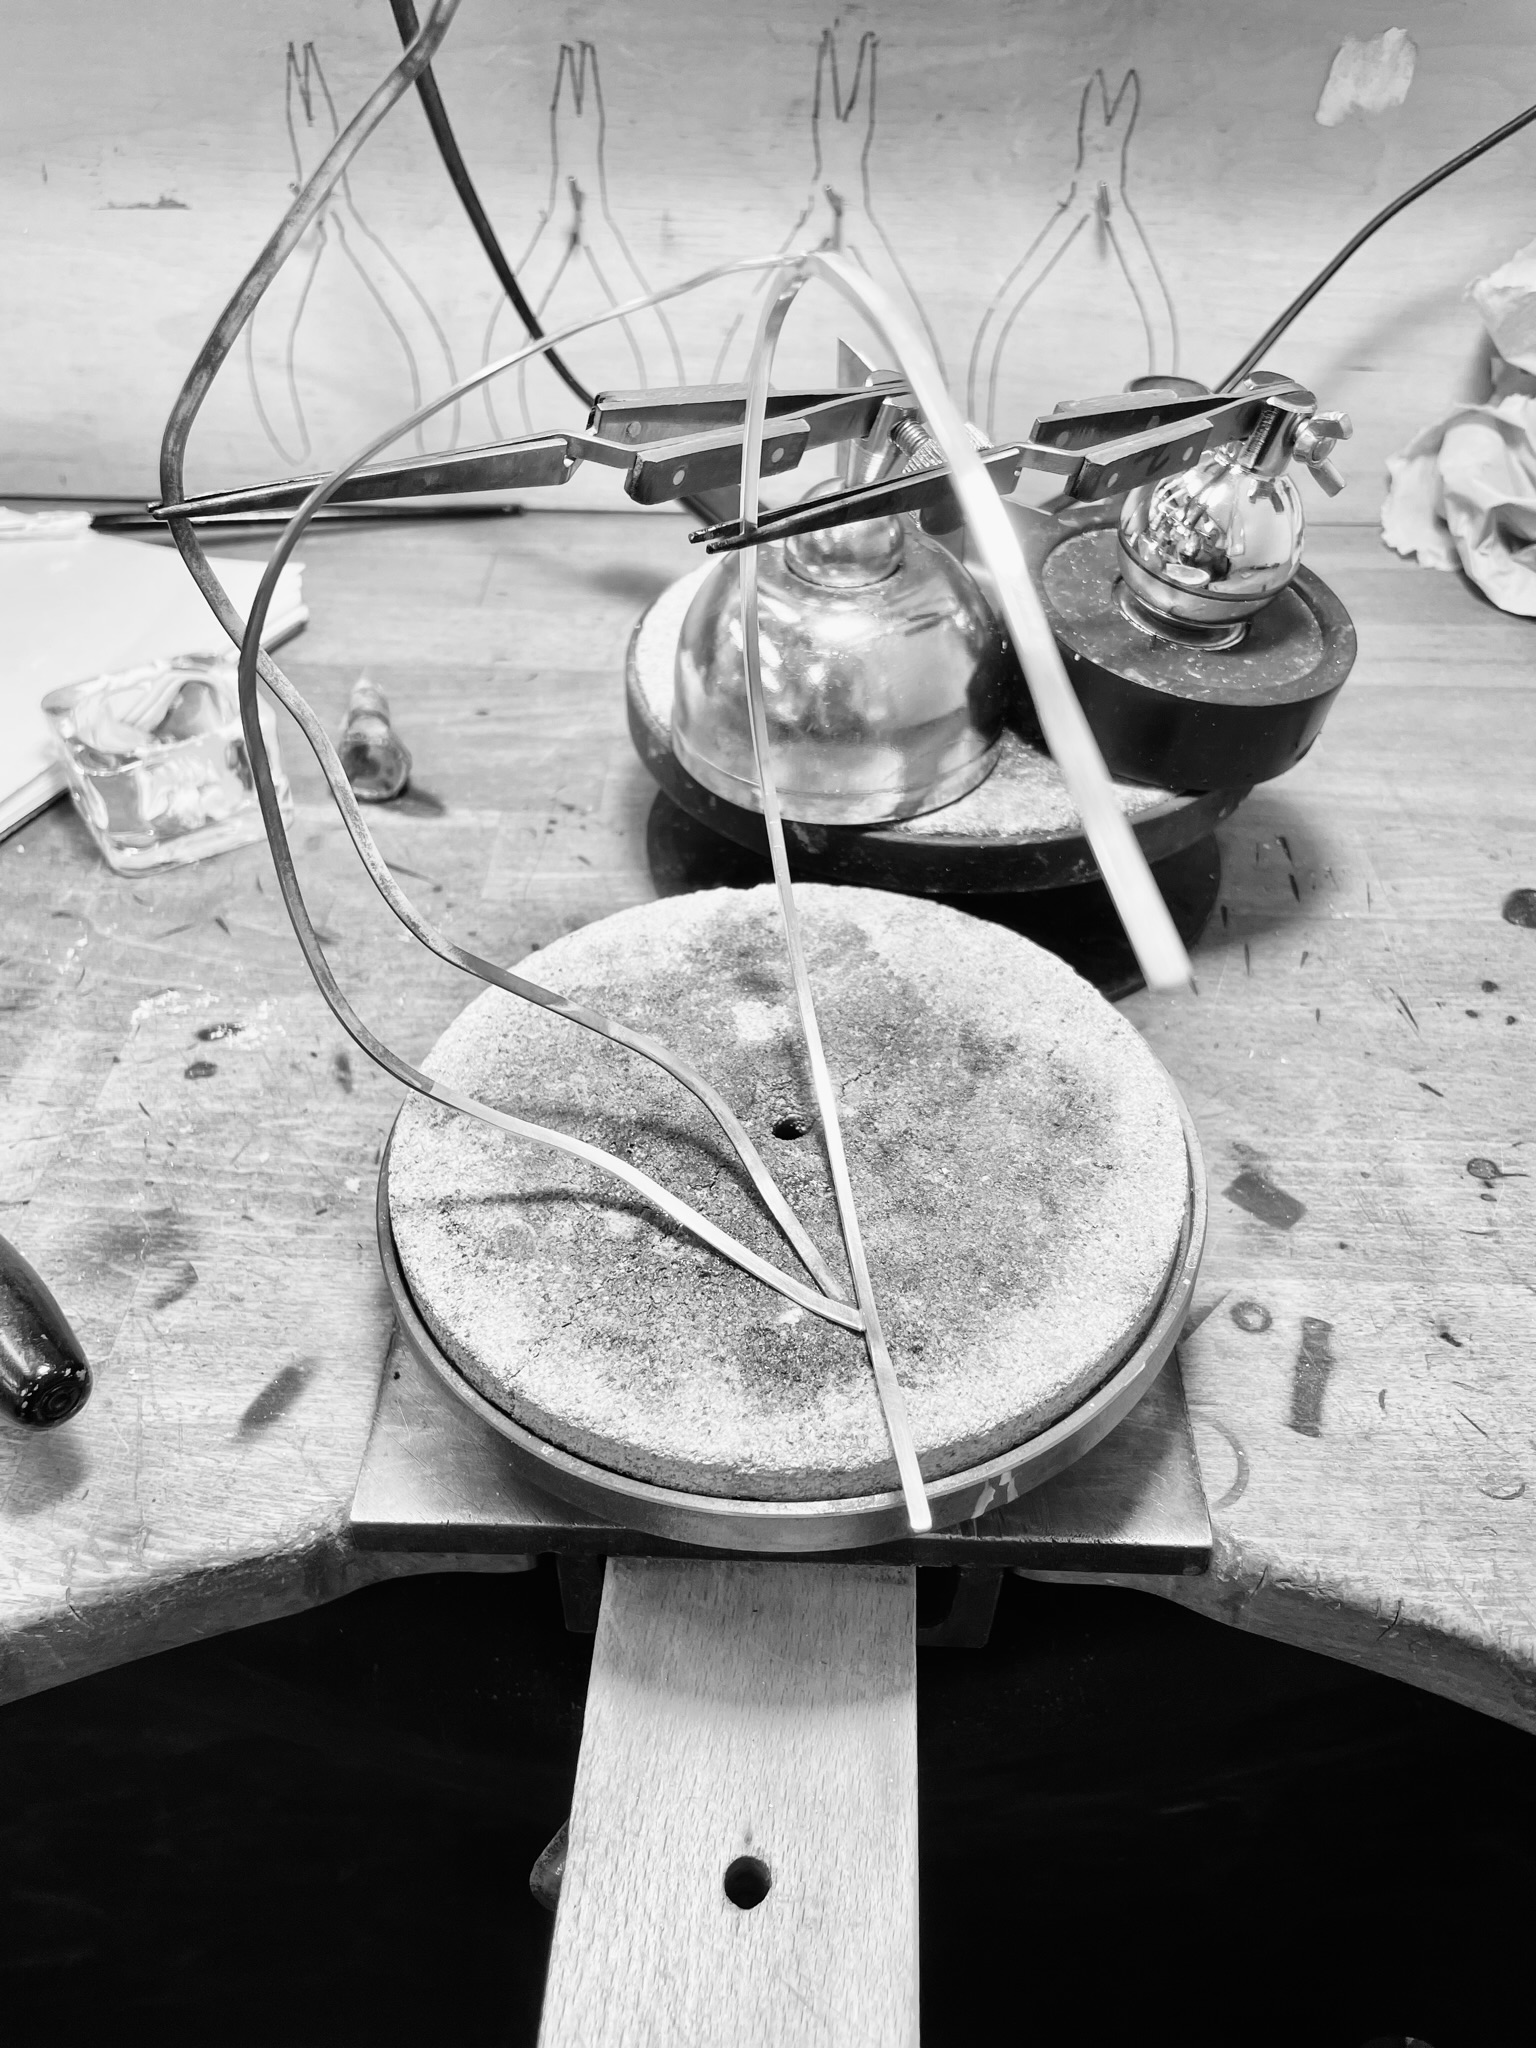 A silver tiara in the making on a silversmith's bench